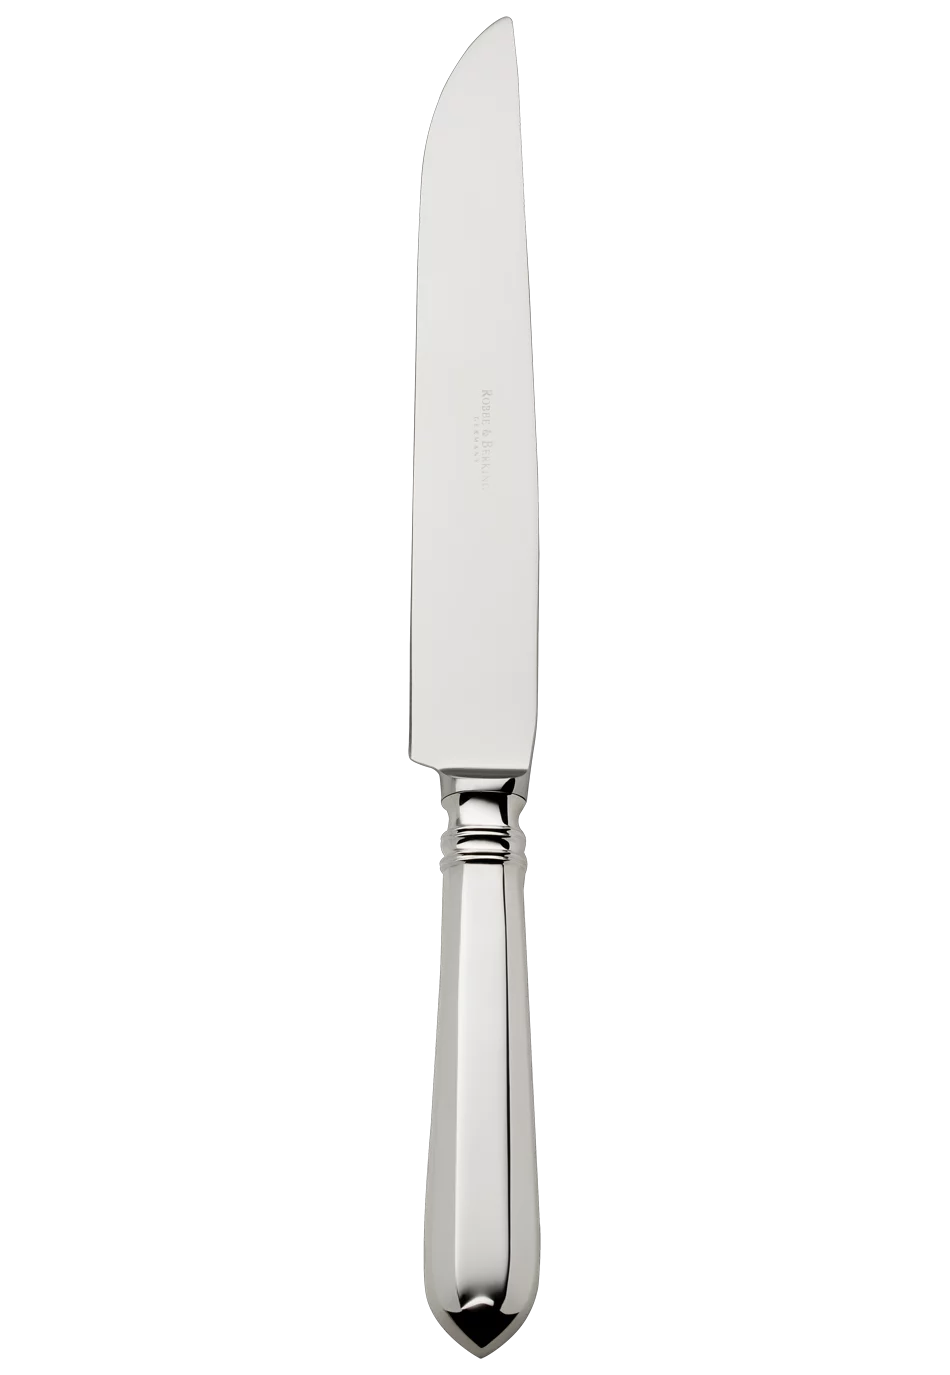 Navette Carving Knife (150g massive silverplated)